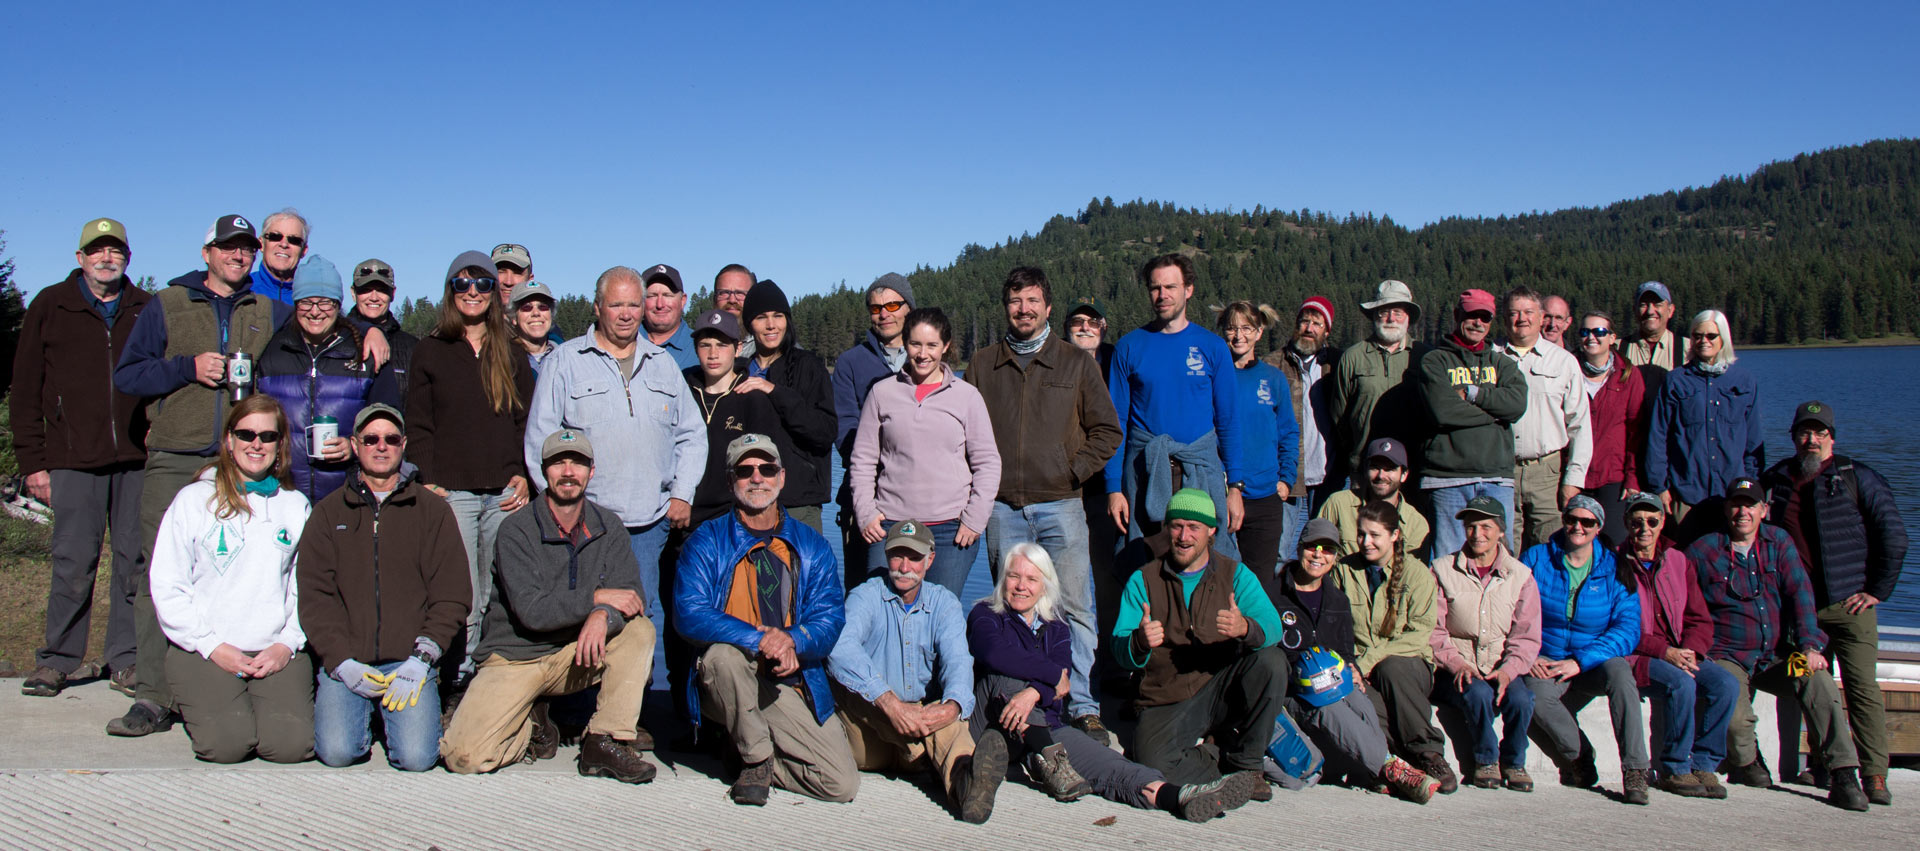  45 volunteers gathered on the shores of Hyatt Lake for the Big Bend Trail Skills College near Ashland, Oregon. Photo by Joe Smith.